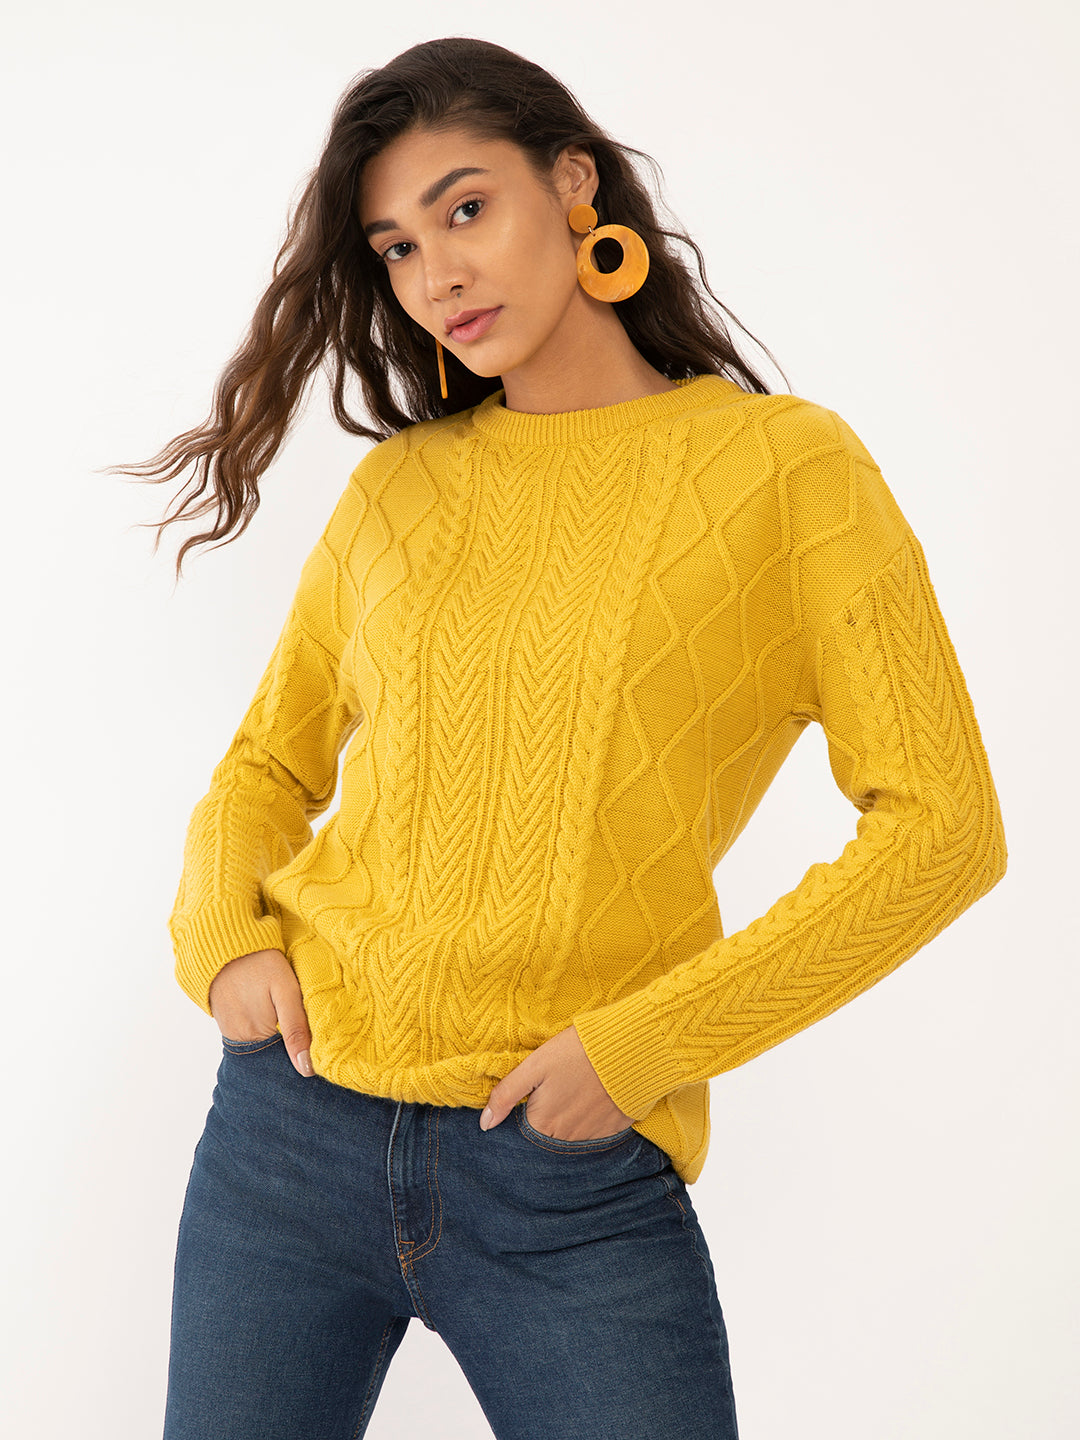 Yellow Solid Overszied Sweaters For Women